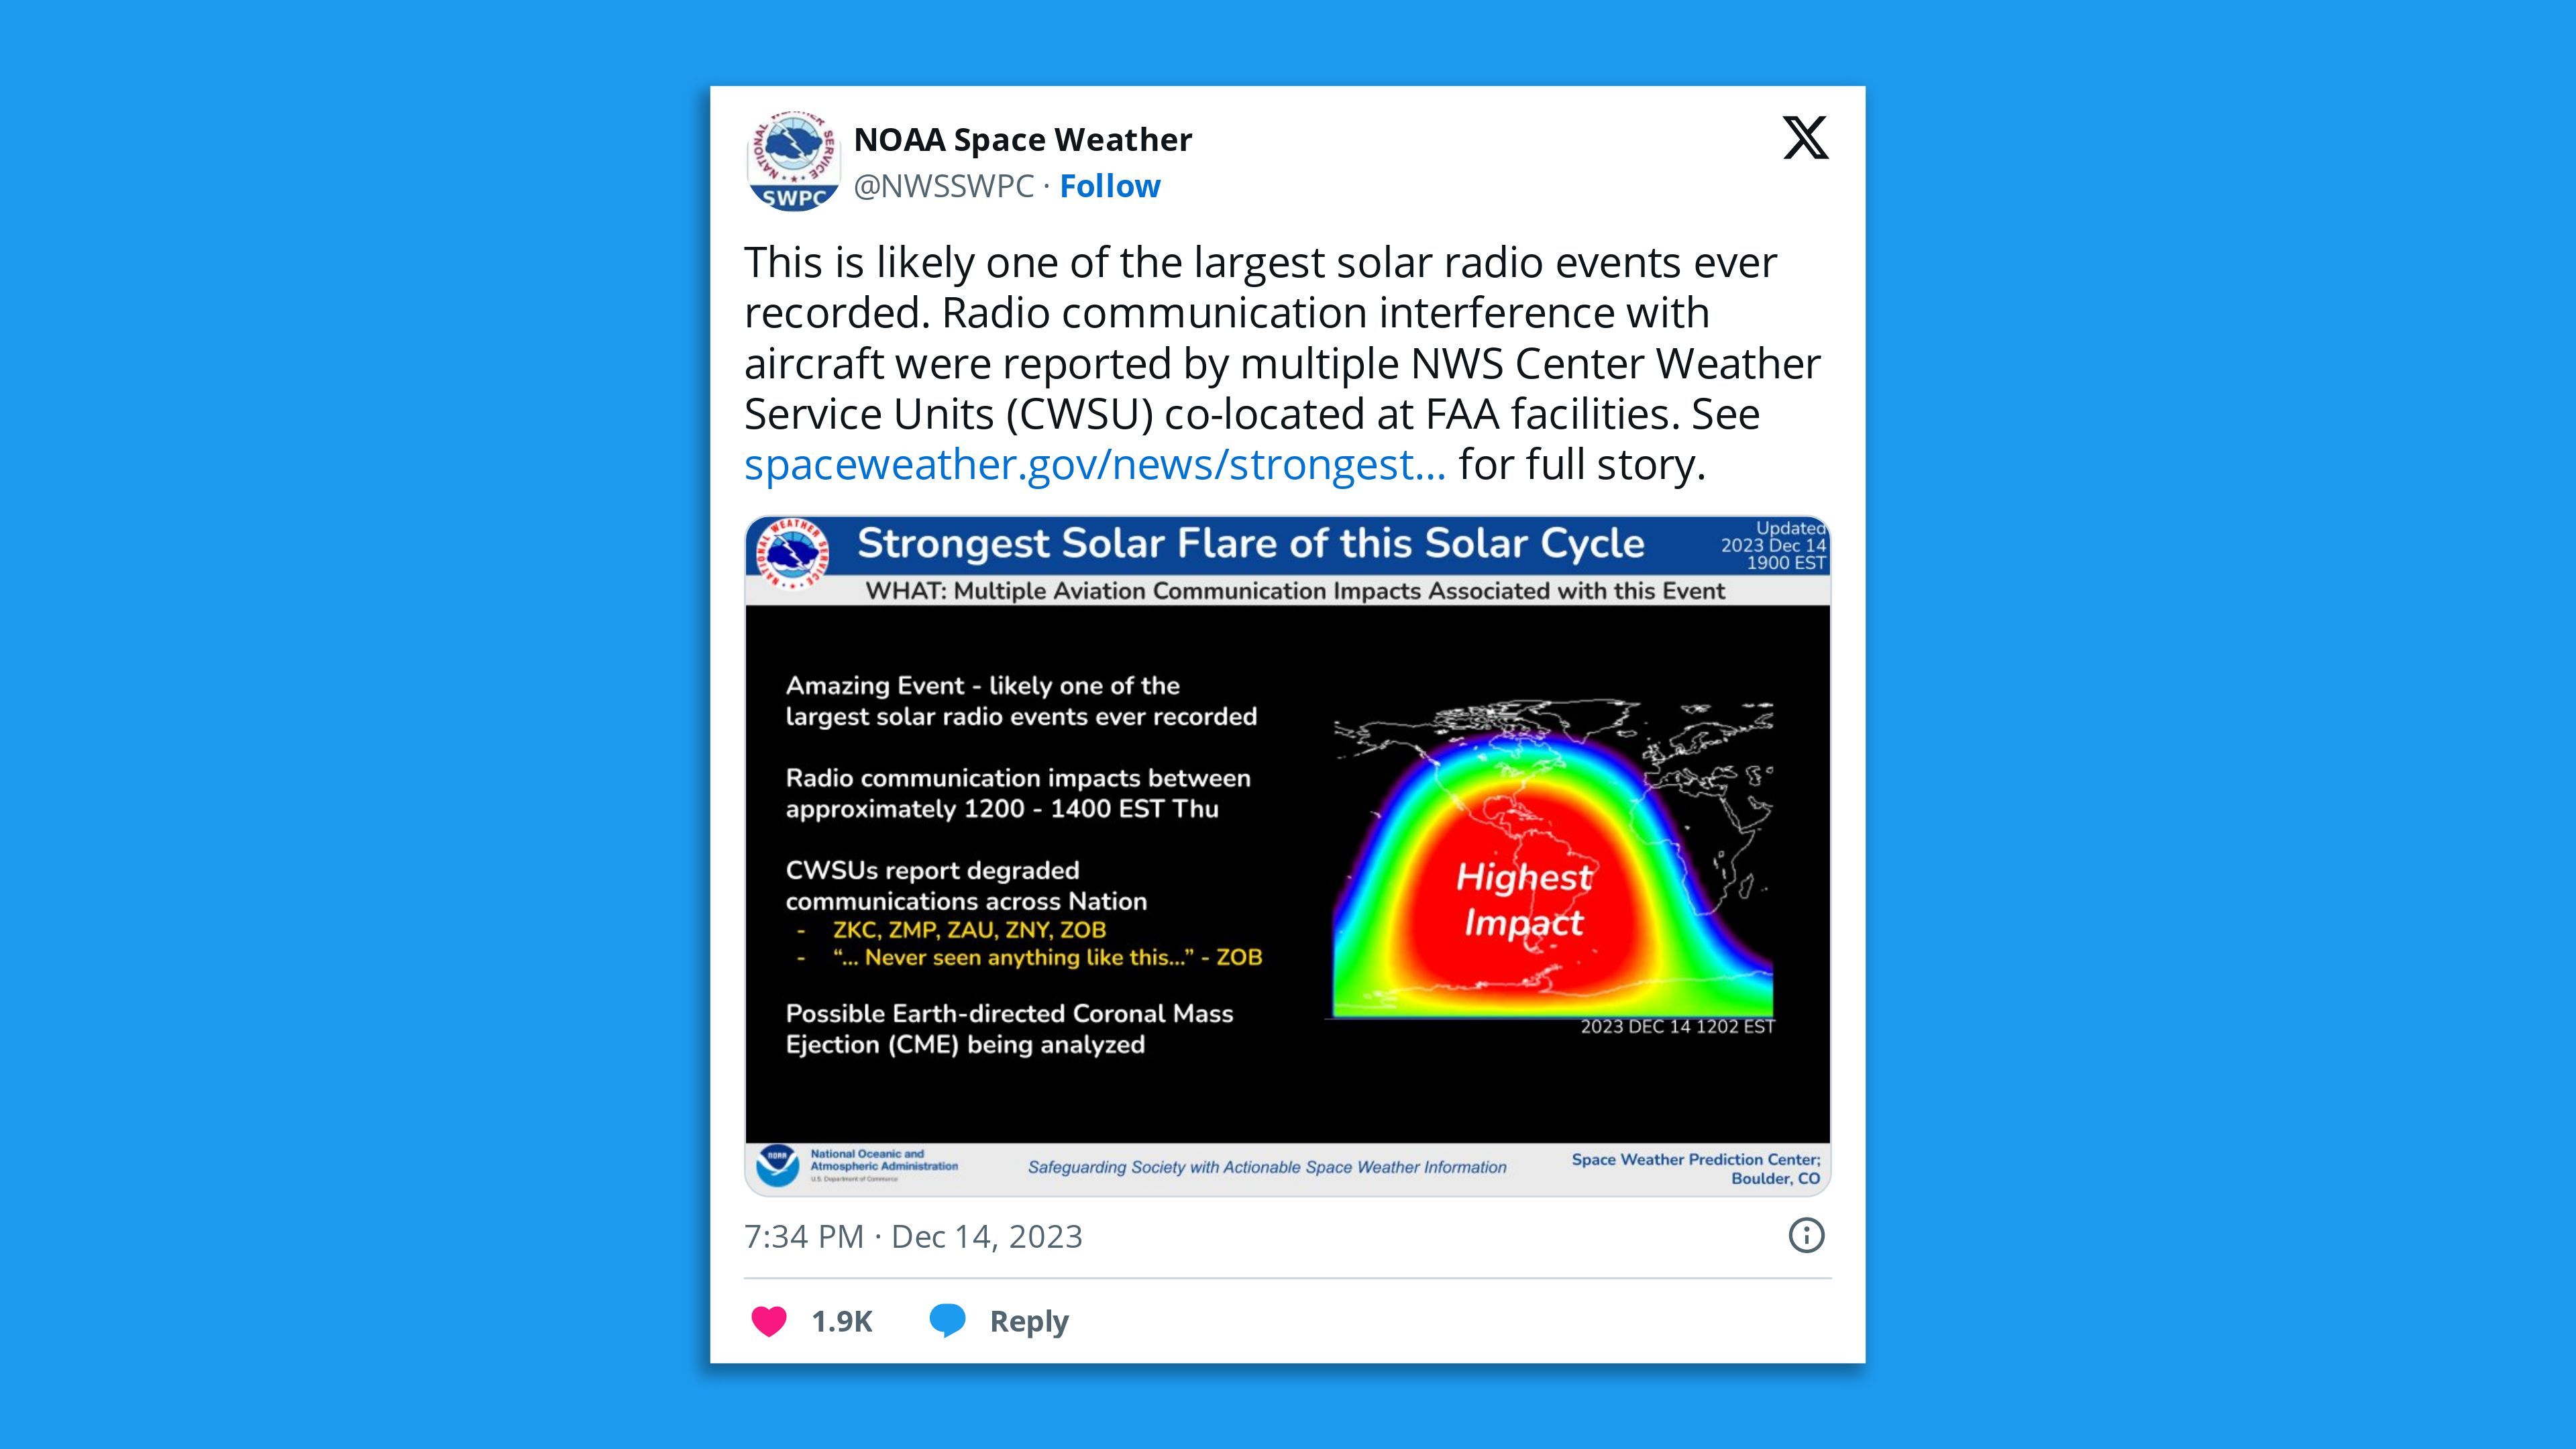 A screenshot of a NOAA Space Weather tweet saying, in part: "This is likely one of the largest solar radio events ever recorded. Radio communication interference with aircraft were reported by multiple NWS Center Weather Service Units (CWSU) co-located at FAA facilities."